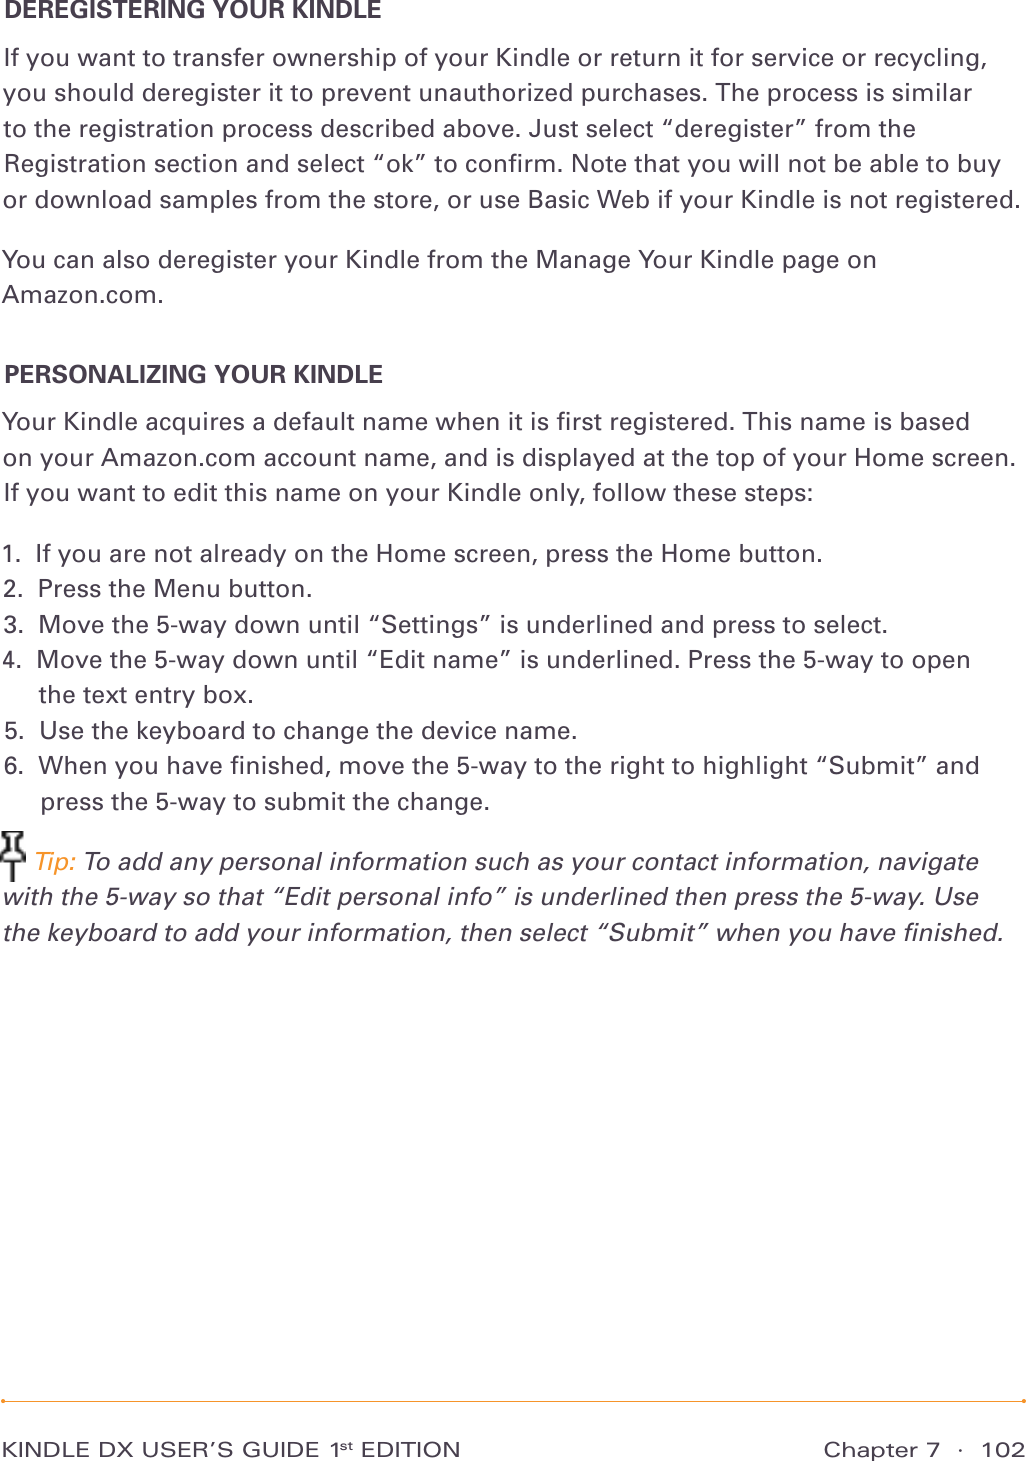 Chapter 7  ·  102KINDLE DX USER’S GUIDE 1st EDITIONDEREGISTERING YOUR KINDLEIf you want to transfer ownership of your Kindle or return it for service or recycling, you should deregister it to prevent unauthorized purchases. The process is similar to the registration process described above. Just select “deregister” from the Registration section and select “ok” to conﬁrm. Note that you will not be able to buy or download samples from the store, or use Basic Web if your Kindle is not registered.You can also deregister your Kindle from the Manage Your Kindle page on  Amazon.com.PERSONALIZING YOUR KINDLEYour Kindle acquires a default name when it is ﬁrst registered. This name is based  on your Amazon.com account name, and is displayed at the top of your Home screen. If you want to edit this name on your Kindle only, follow these steps:1.  If you are not already on the Home screen, press the Home button. 2.  Press the Menu button. 3.  Move the 5-way down until “Settings” is underlined and press to select. 4.   Move the 5-way down until “Edit name” is underlined. Press the 5-way to open  the text entry box. 5.  Use the keyboard to change the device name. 6.   When you have ﬁnished, move the 5-way to the right to highlight “Submit” and press the 5-way to submit the change.  Tip: To add any personal information such as your contact information, navigate with the 5-way so that “Edit personal info” is underlined then press the 5-way. Use  the keyboard to add your information, then select “Submit” when you have ﬁnished.